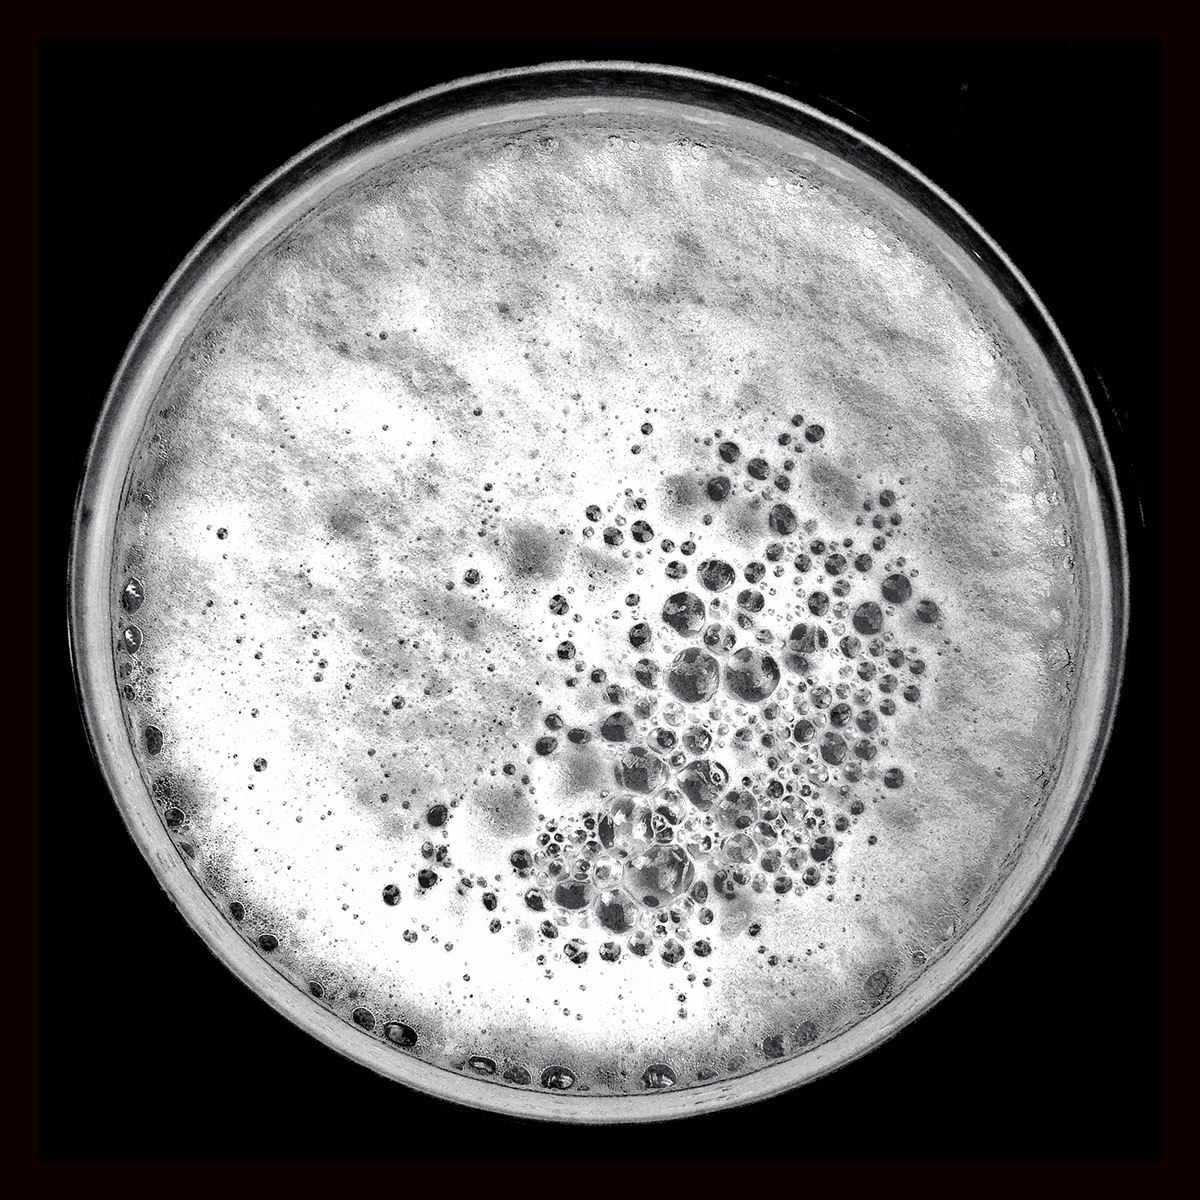 beer craft beer Michigan bells brewing brewery top over head black and white square symmetrical symmetry circle